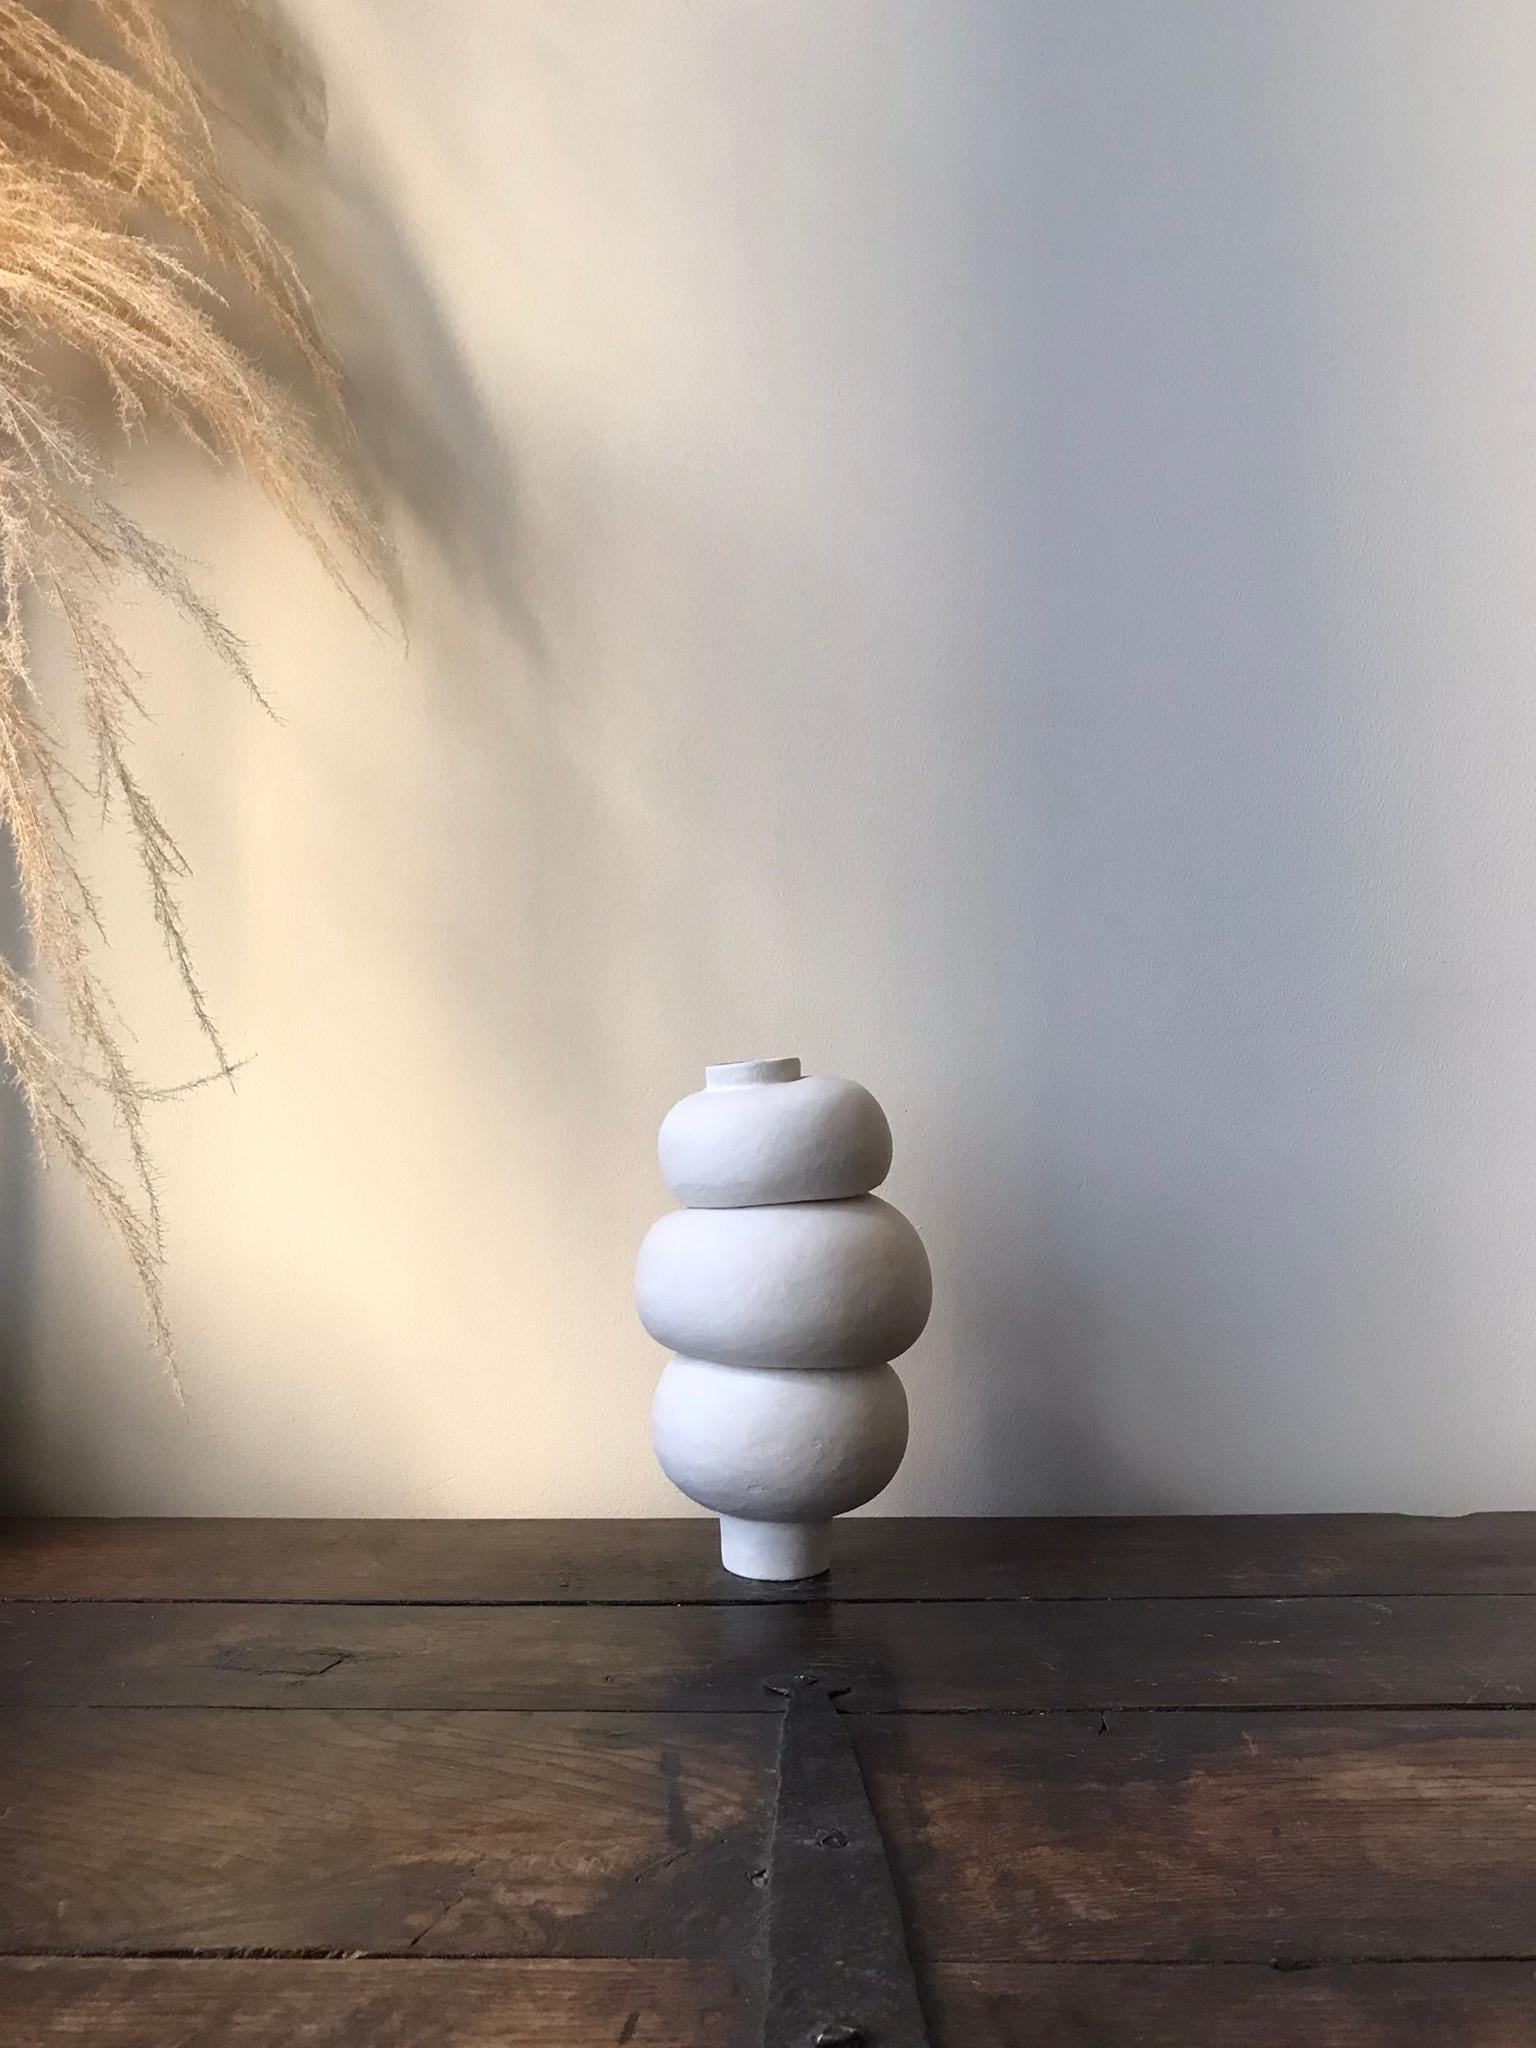 Each of Françoise Jeffrey's ceramic pieces is hand made, coil built, organically shaped and unique in their own way, thus creating a basic and timeless design. Perfectly imperfect, inspired by the Japanese philosophy wabi-sabi.

For Jeffrey less is